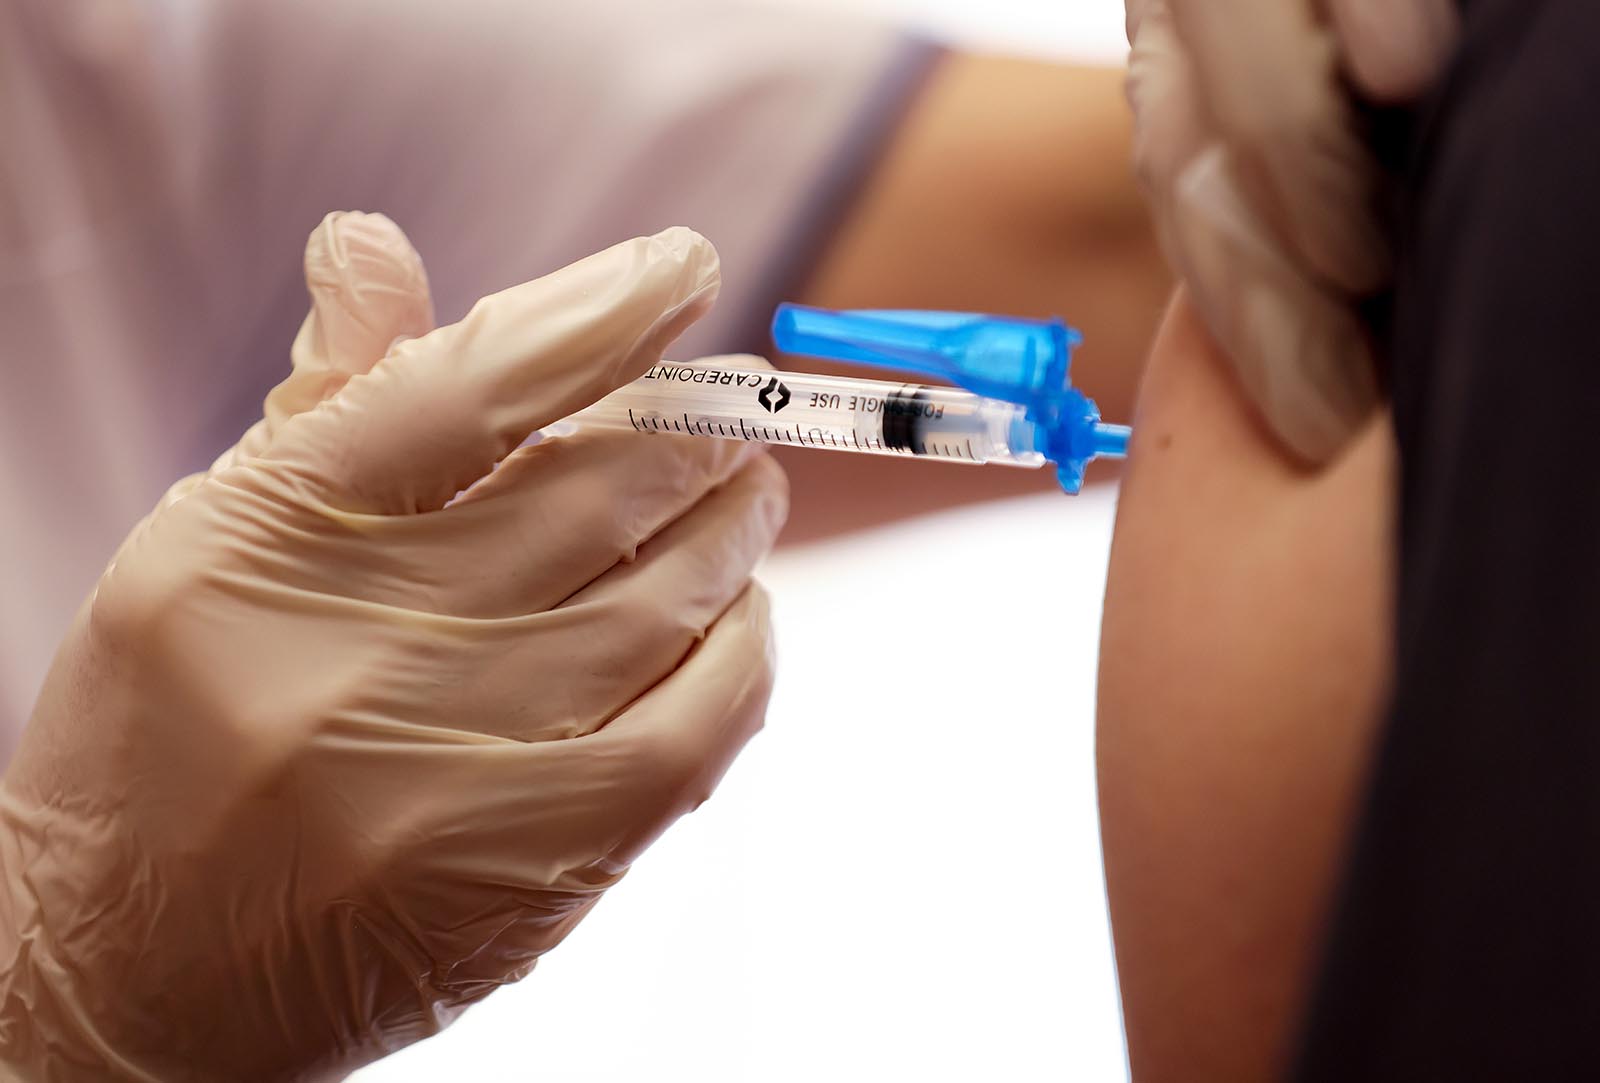 We explain 8 myths about the covid-19 vaccine